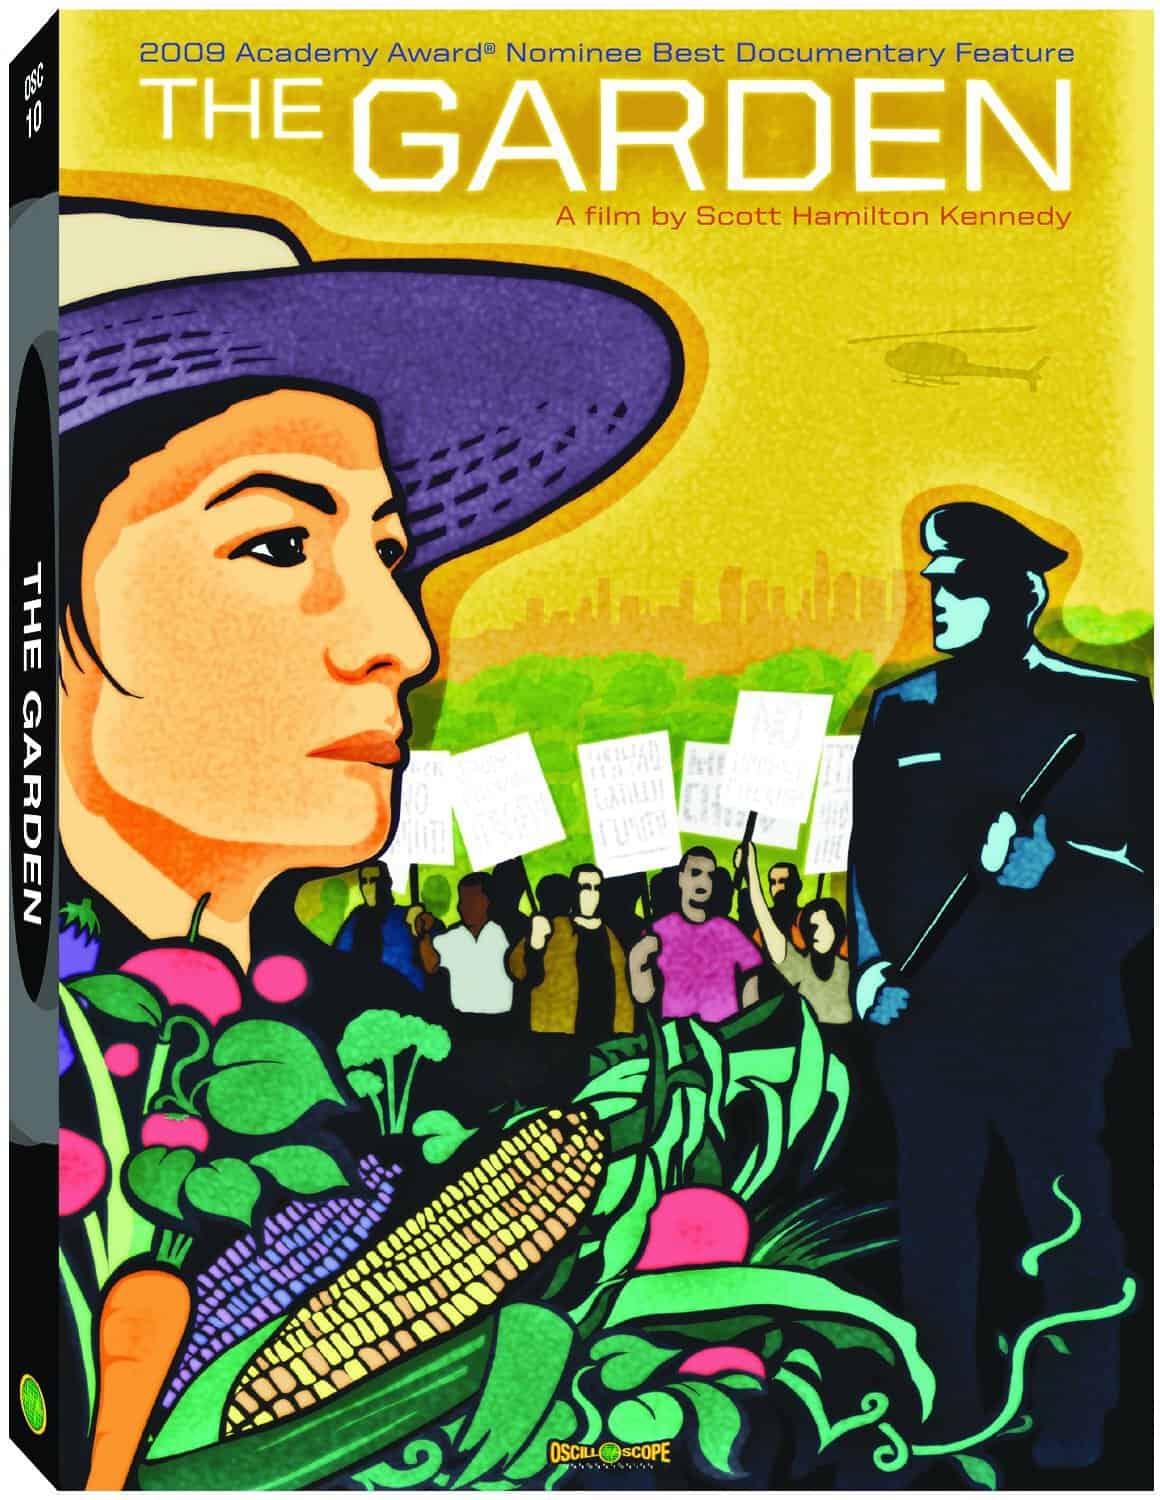 DVD cover of "The Garden Movie" documentary, depicting a woman in a wide-brimmed hat and a shadowy figure standing in a colorful, illustrated garden with people protesting in the background.